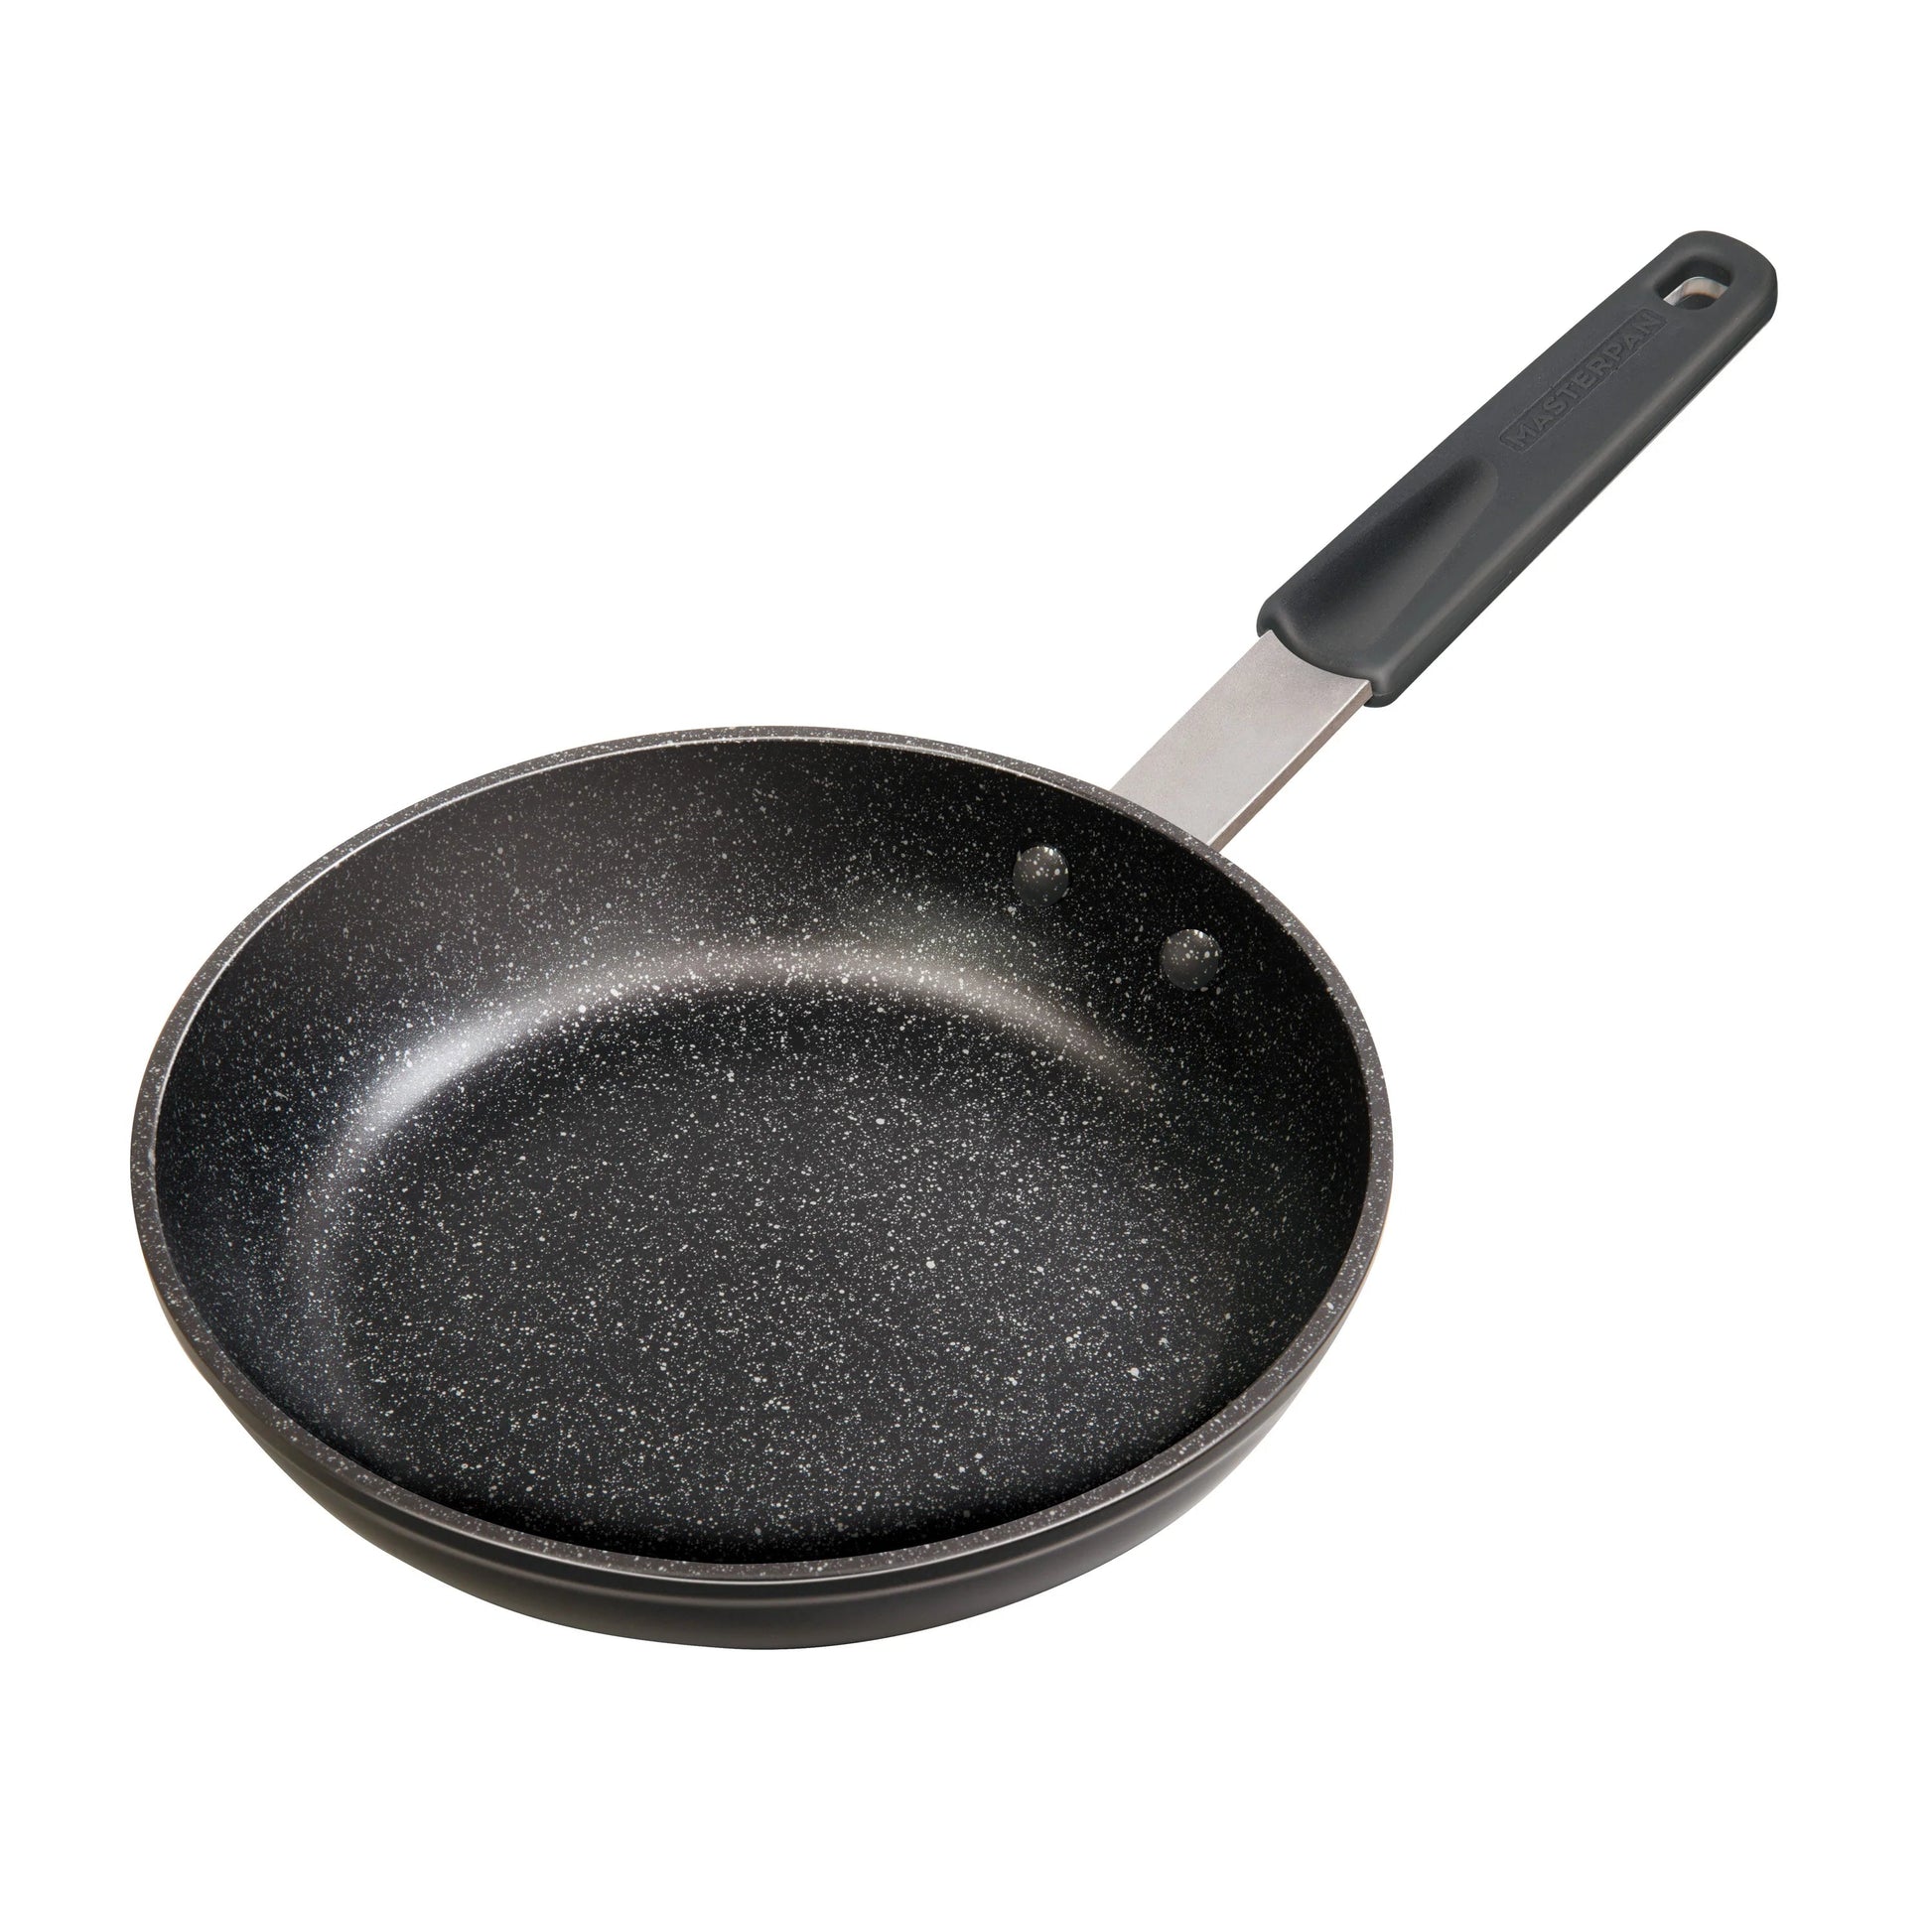 https://kitchenoasis.com/cdn/shop/files/MASTERPAN-Chefs-Series-10-4-Layer-Ceramic-Re-Enforced-Non-Stick-Cast-Aluminum-Frying-Pan-and-Skillet-With-Riveted-Stainless-Steel-Handle-and-Removable-Silicone-Handle-Cover.webp?v=1685839959&width=1946